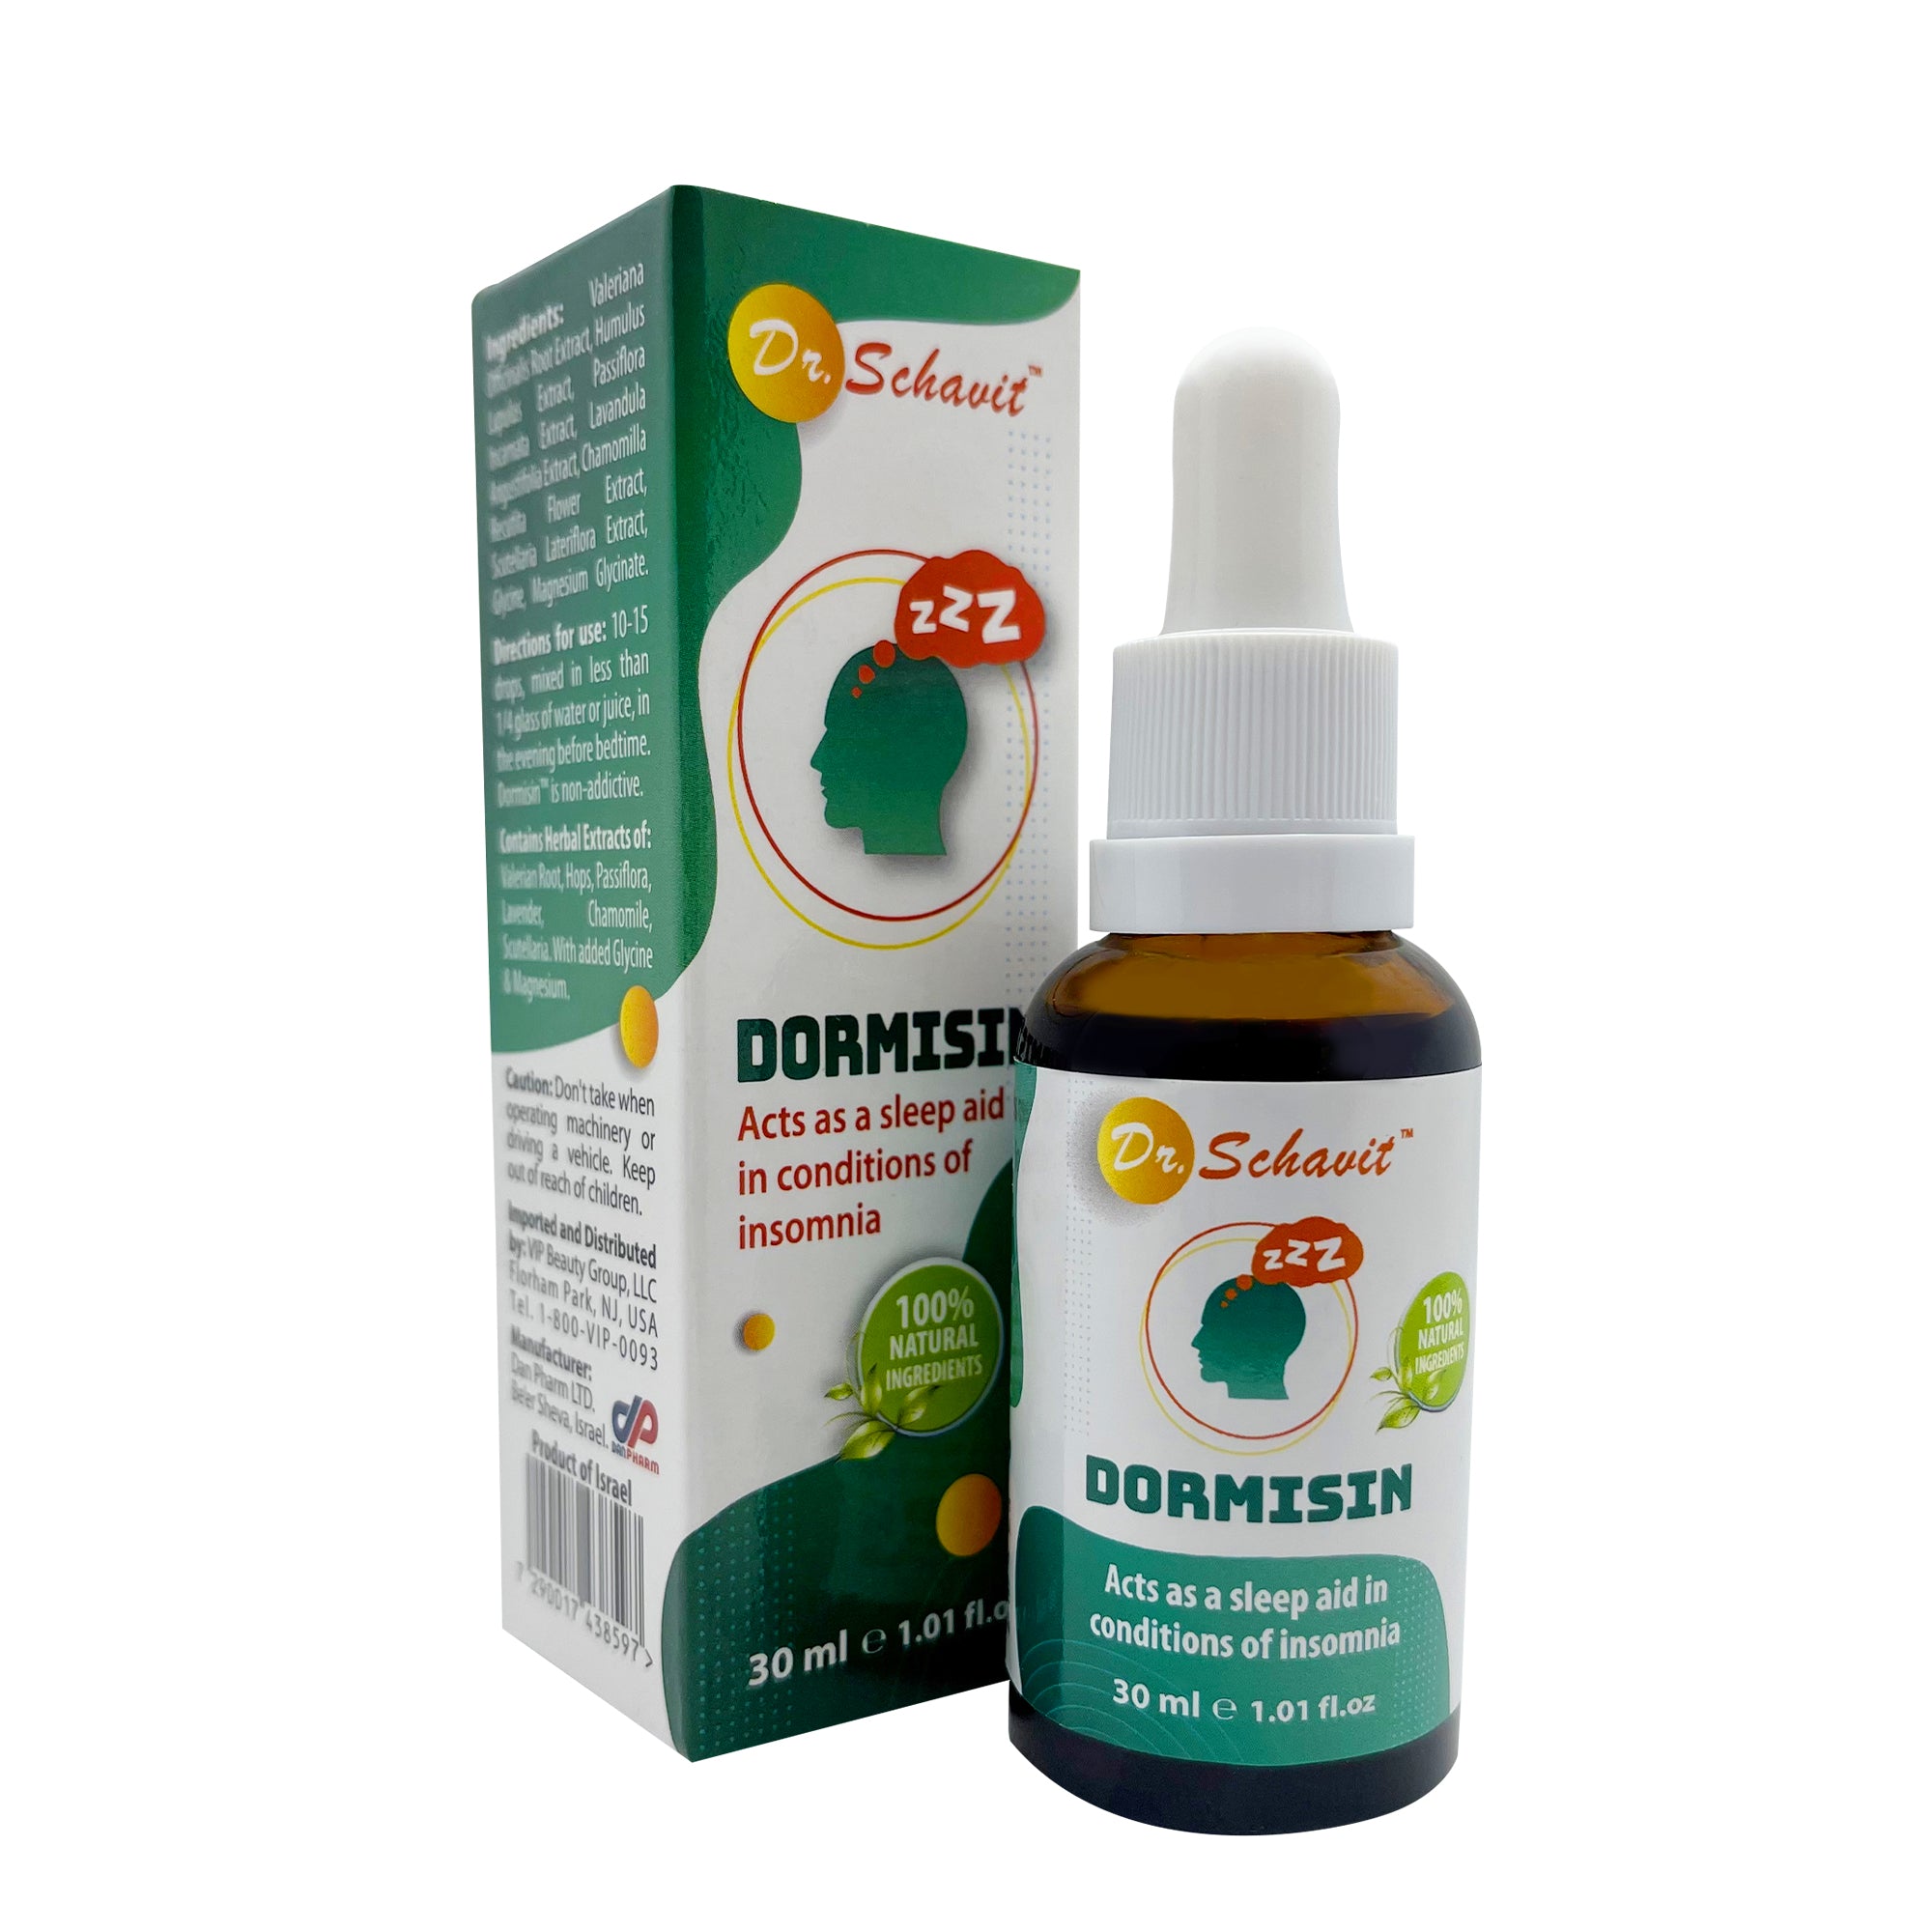 DORMISIN Sleep Aid Drops - Liquid Valerian Root and Herbal Extracts - Organic Sleep Aid Anxiety Stress Relief Drops- for Anxiety and Restlessness